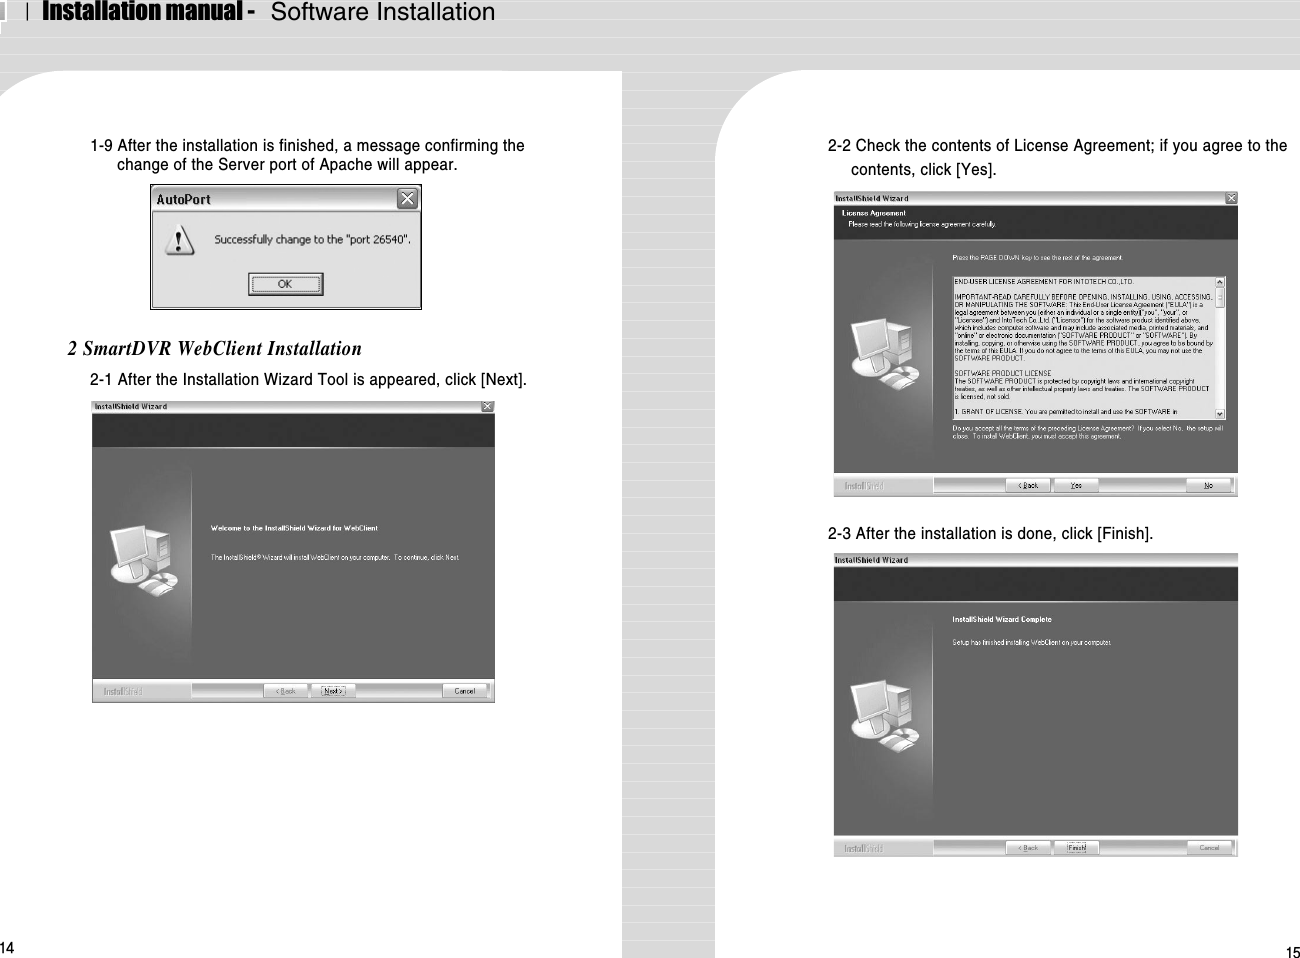 ⅠInstallation manual -   Software Installation14 151-9 After the installation is finished, a message confirming thechange of the Server port of Apache will appear.2 SmartDVR WebClient Installation2-1 After the Installation Wizard Tool is appeared, click [Next].2-2 Check the contents of License Agreement; if you agree to thecontents, click [Yes]. 2-3 After the installation is done, click [Finish].